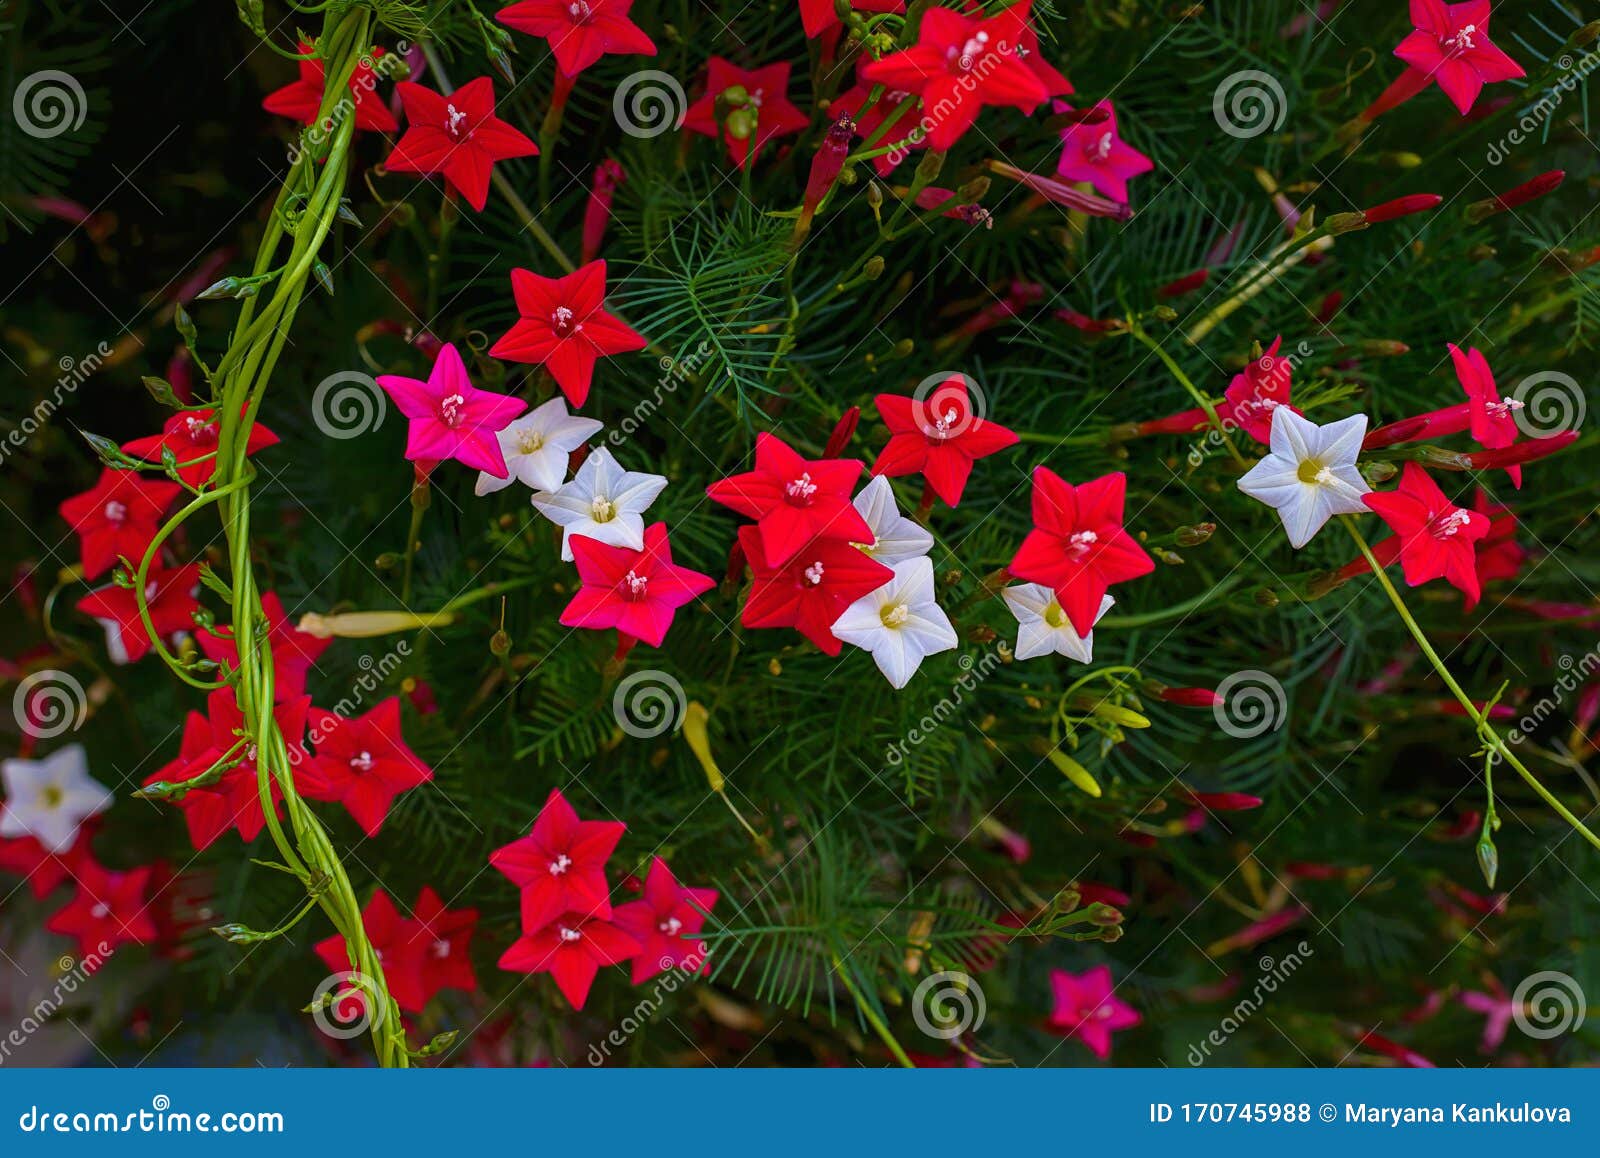 ipomoea quamoclit cypress vine. tropical plant in the form of a star white, scarlet and pink